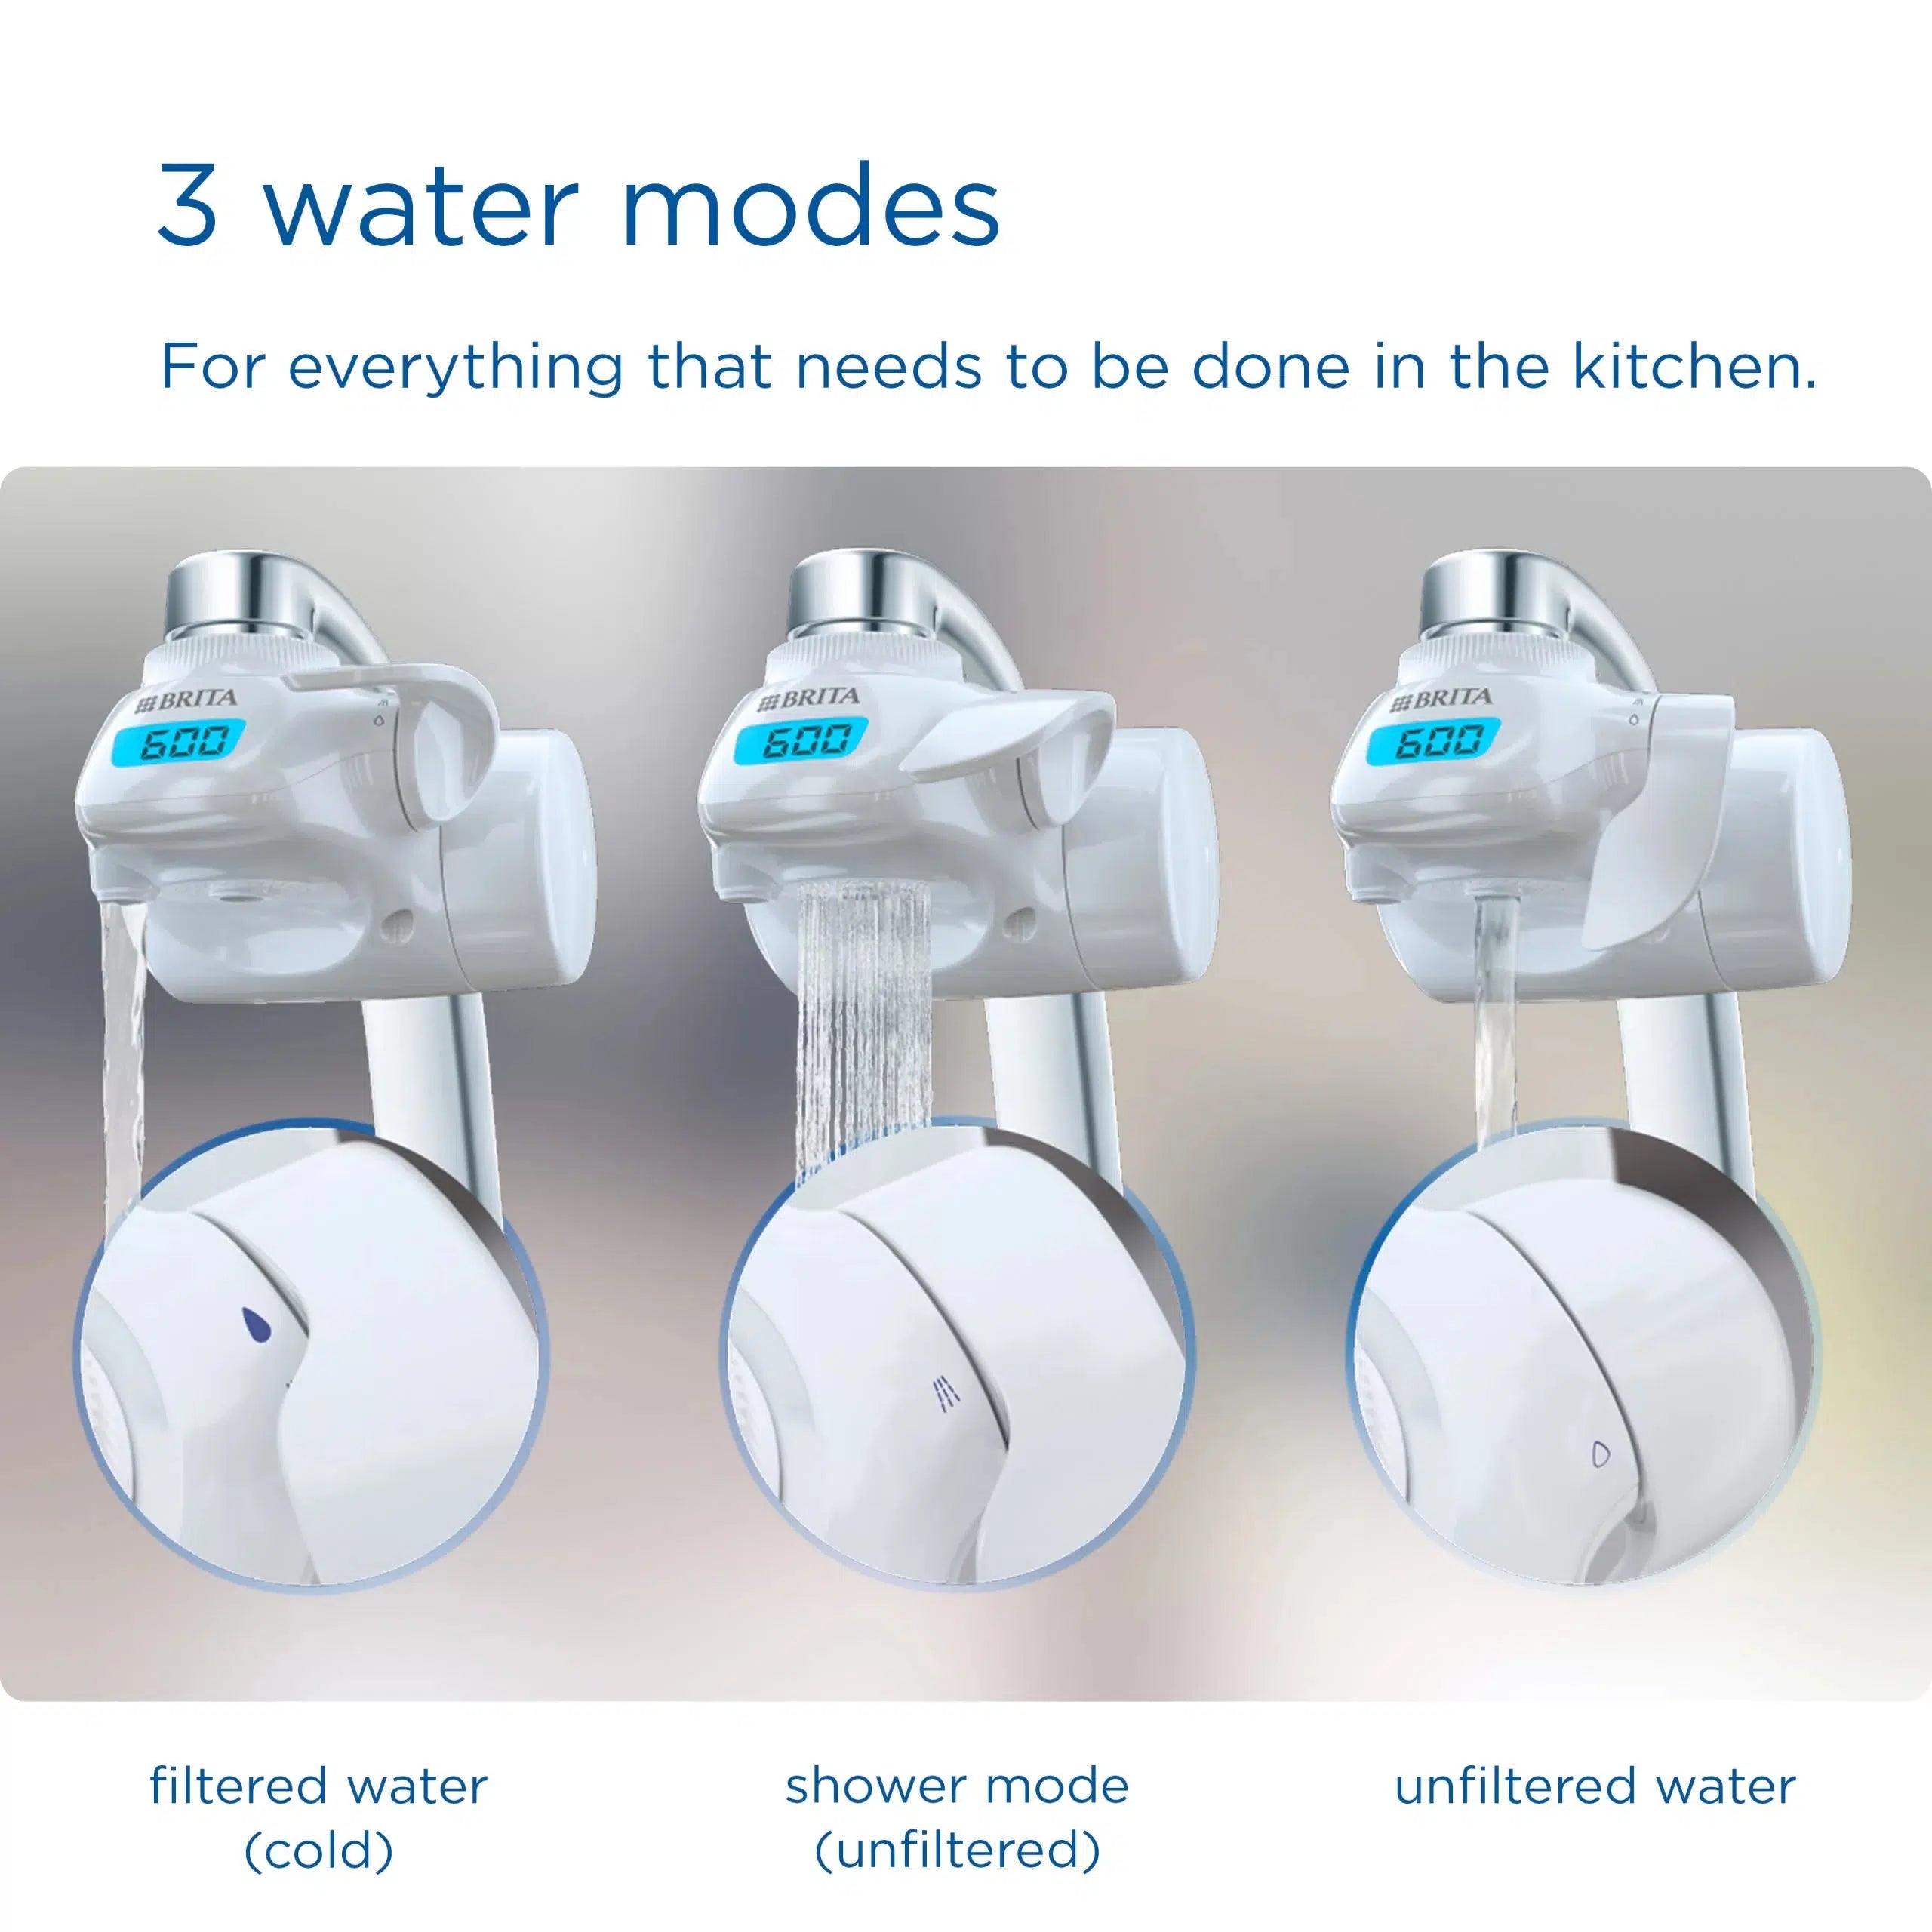 BRITA fill&serve- an easy way to 8 glasses of filtered water daily